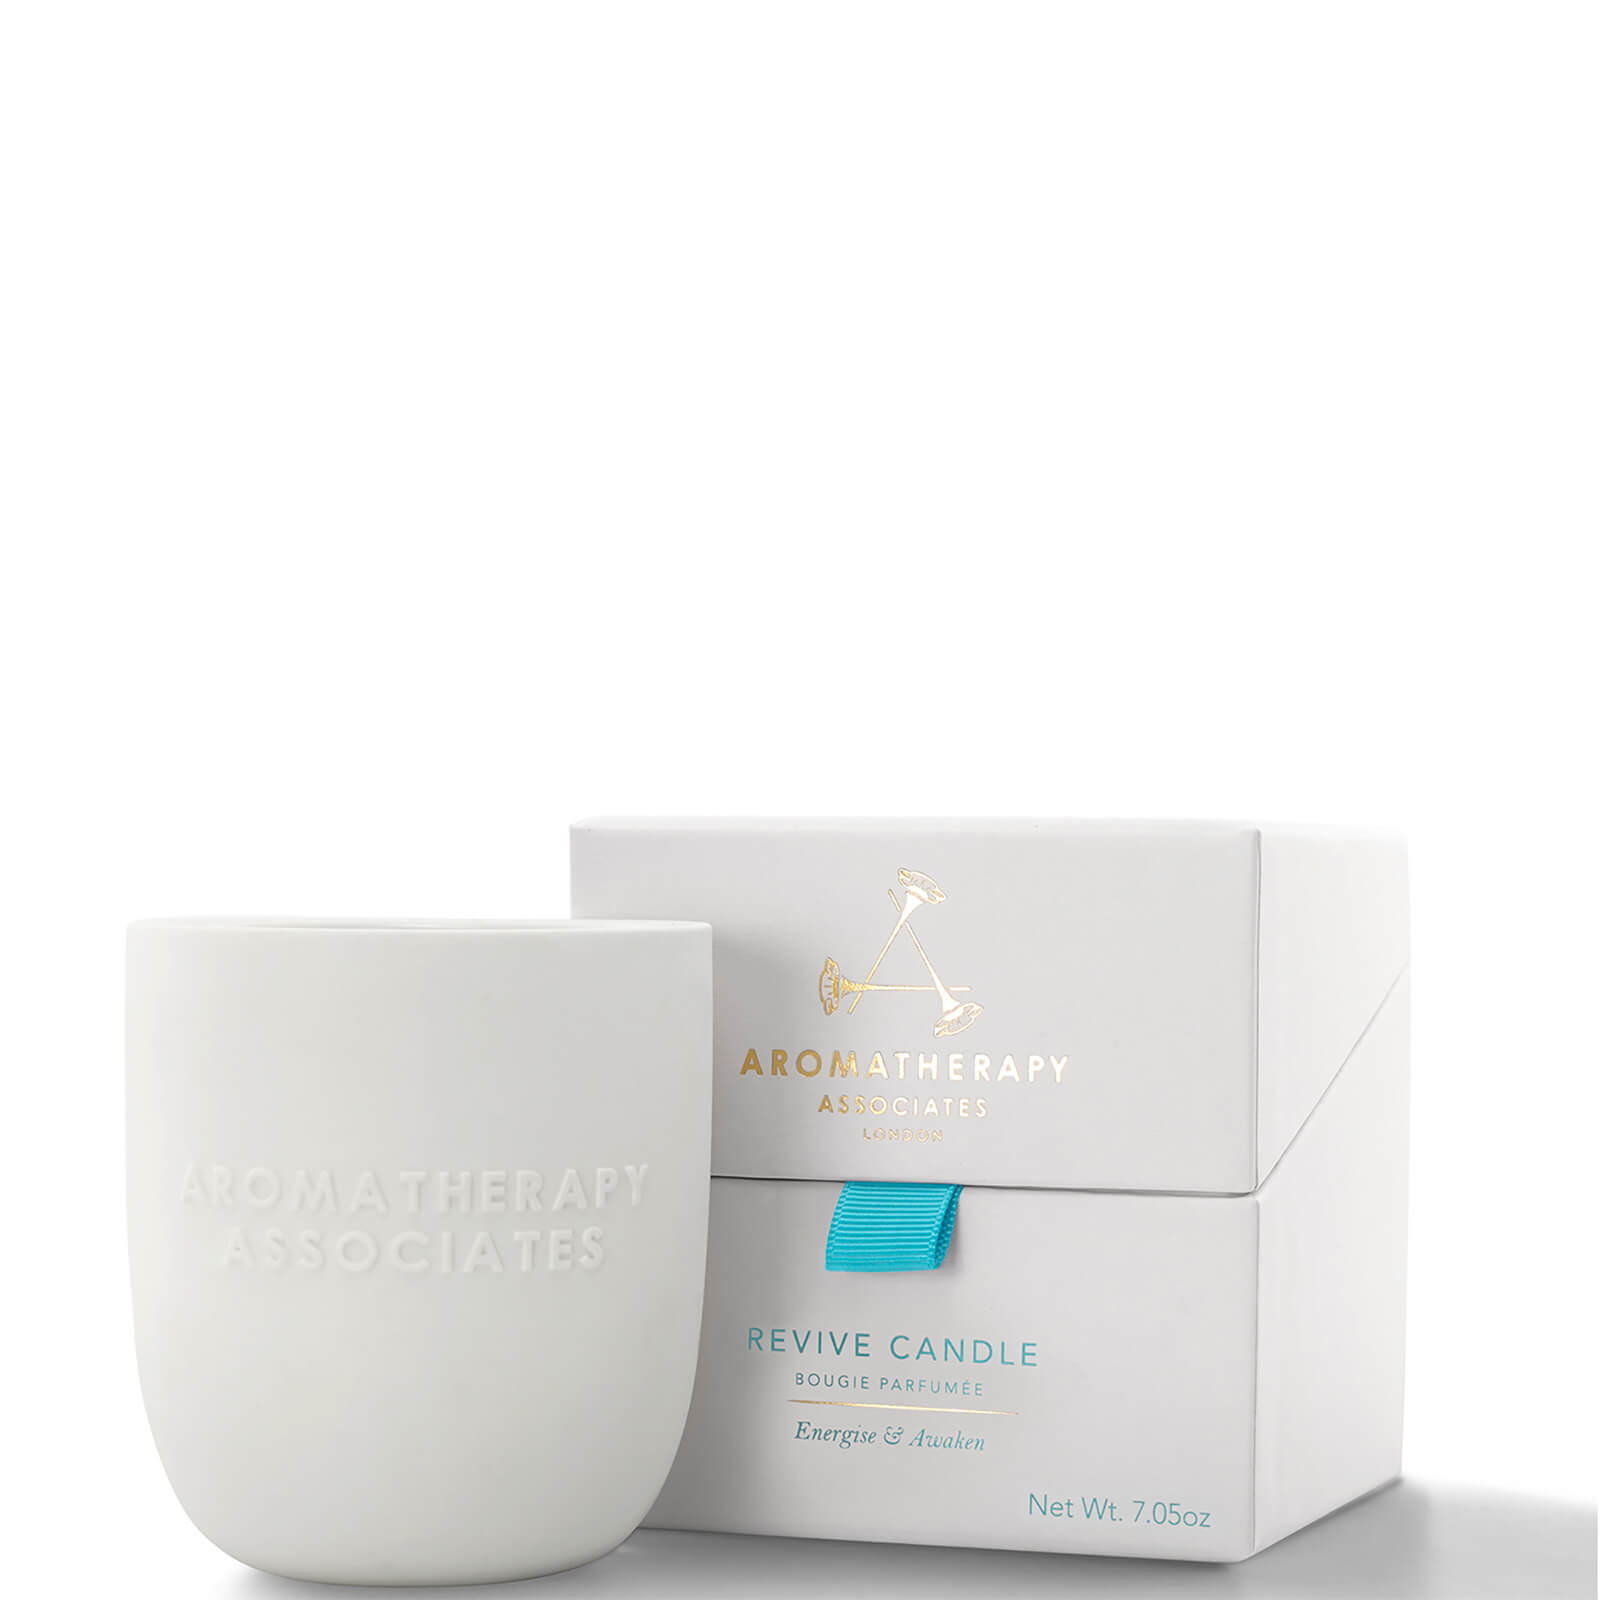 Image of Aromatherapy Associates Revive Candle 200g